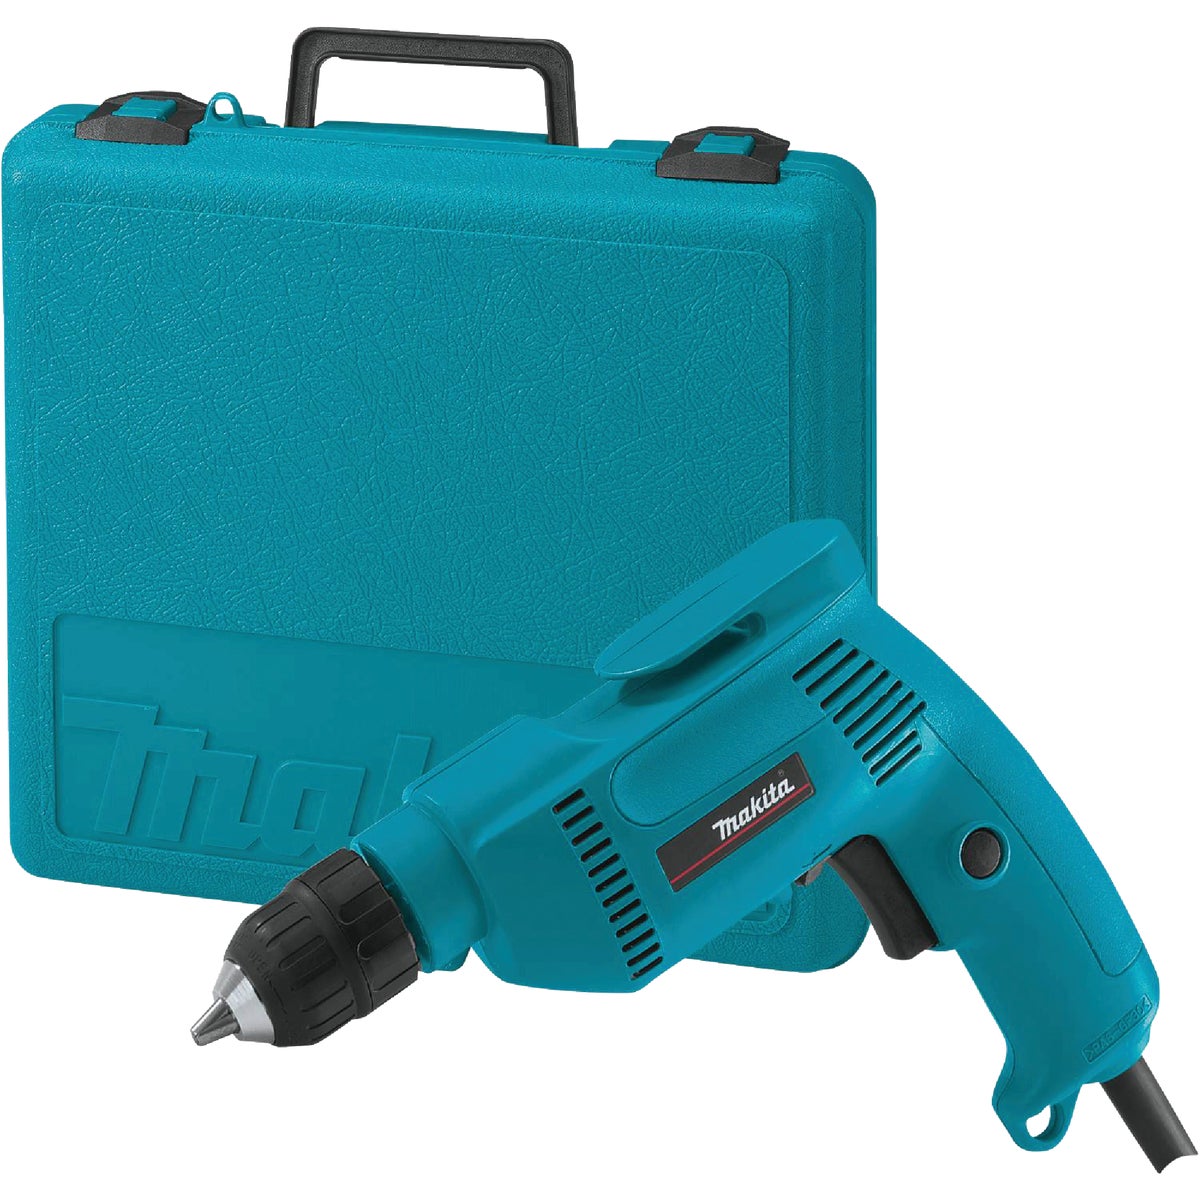 Makita 3/8 In. 4.9-Amp Keyless Electric Drill with Case